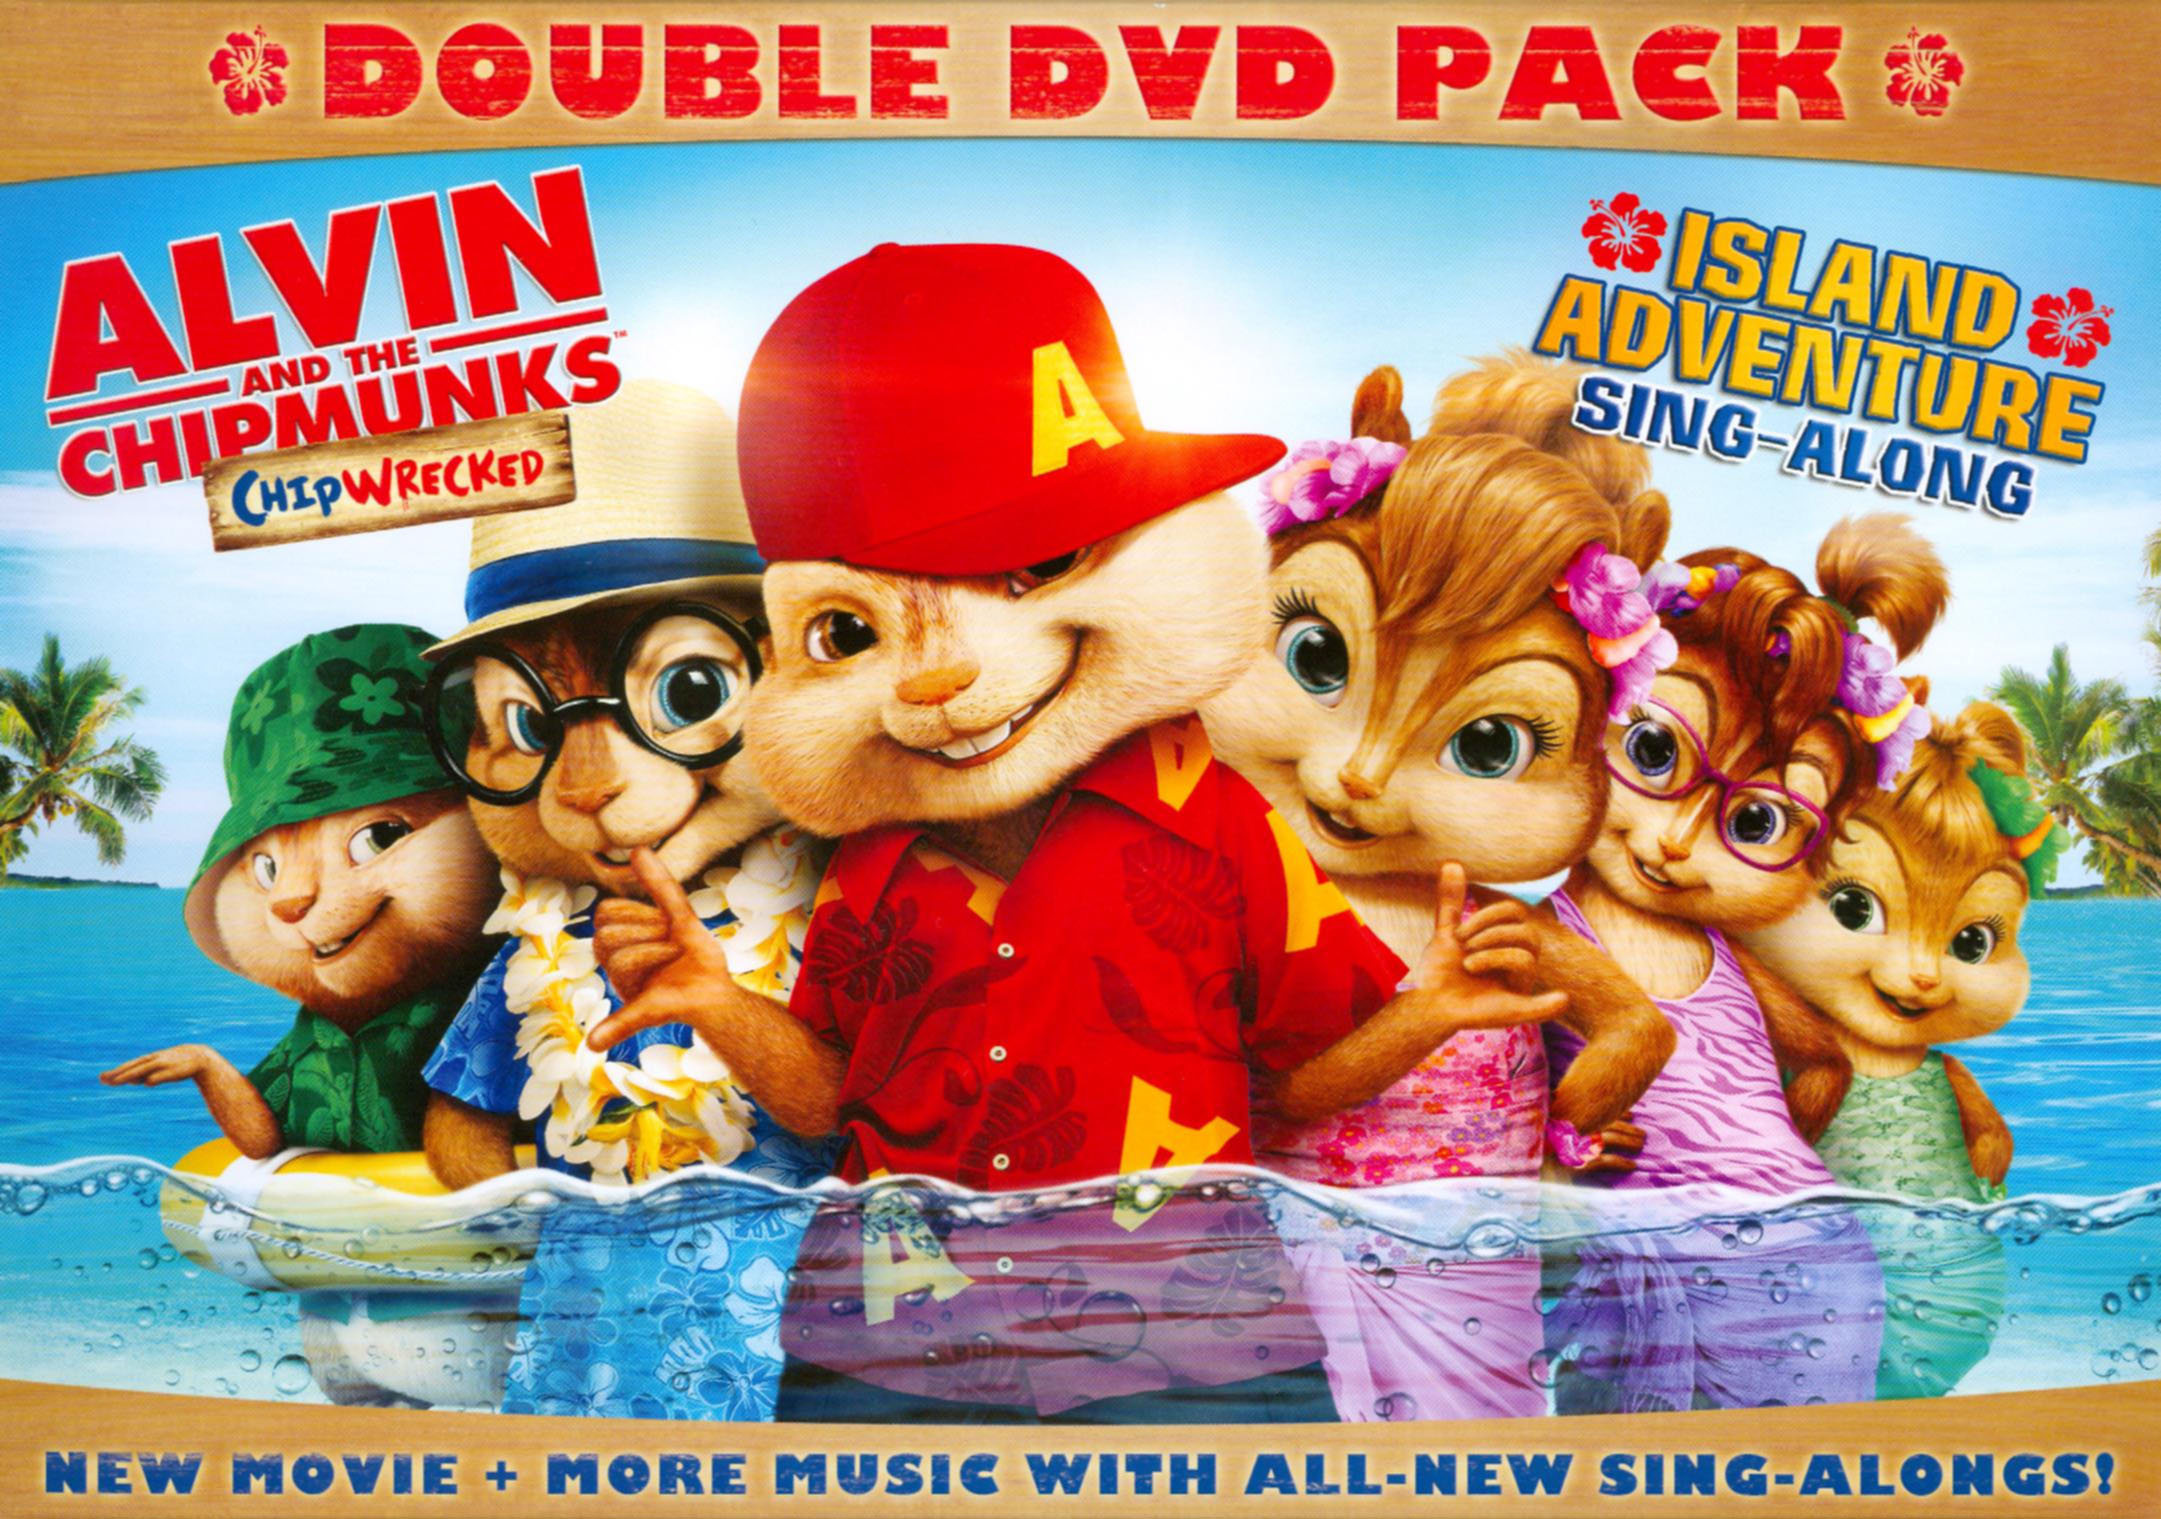 Alvin and the Chipmunks  20th Century Studios Family